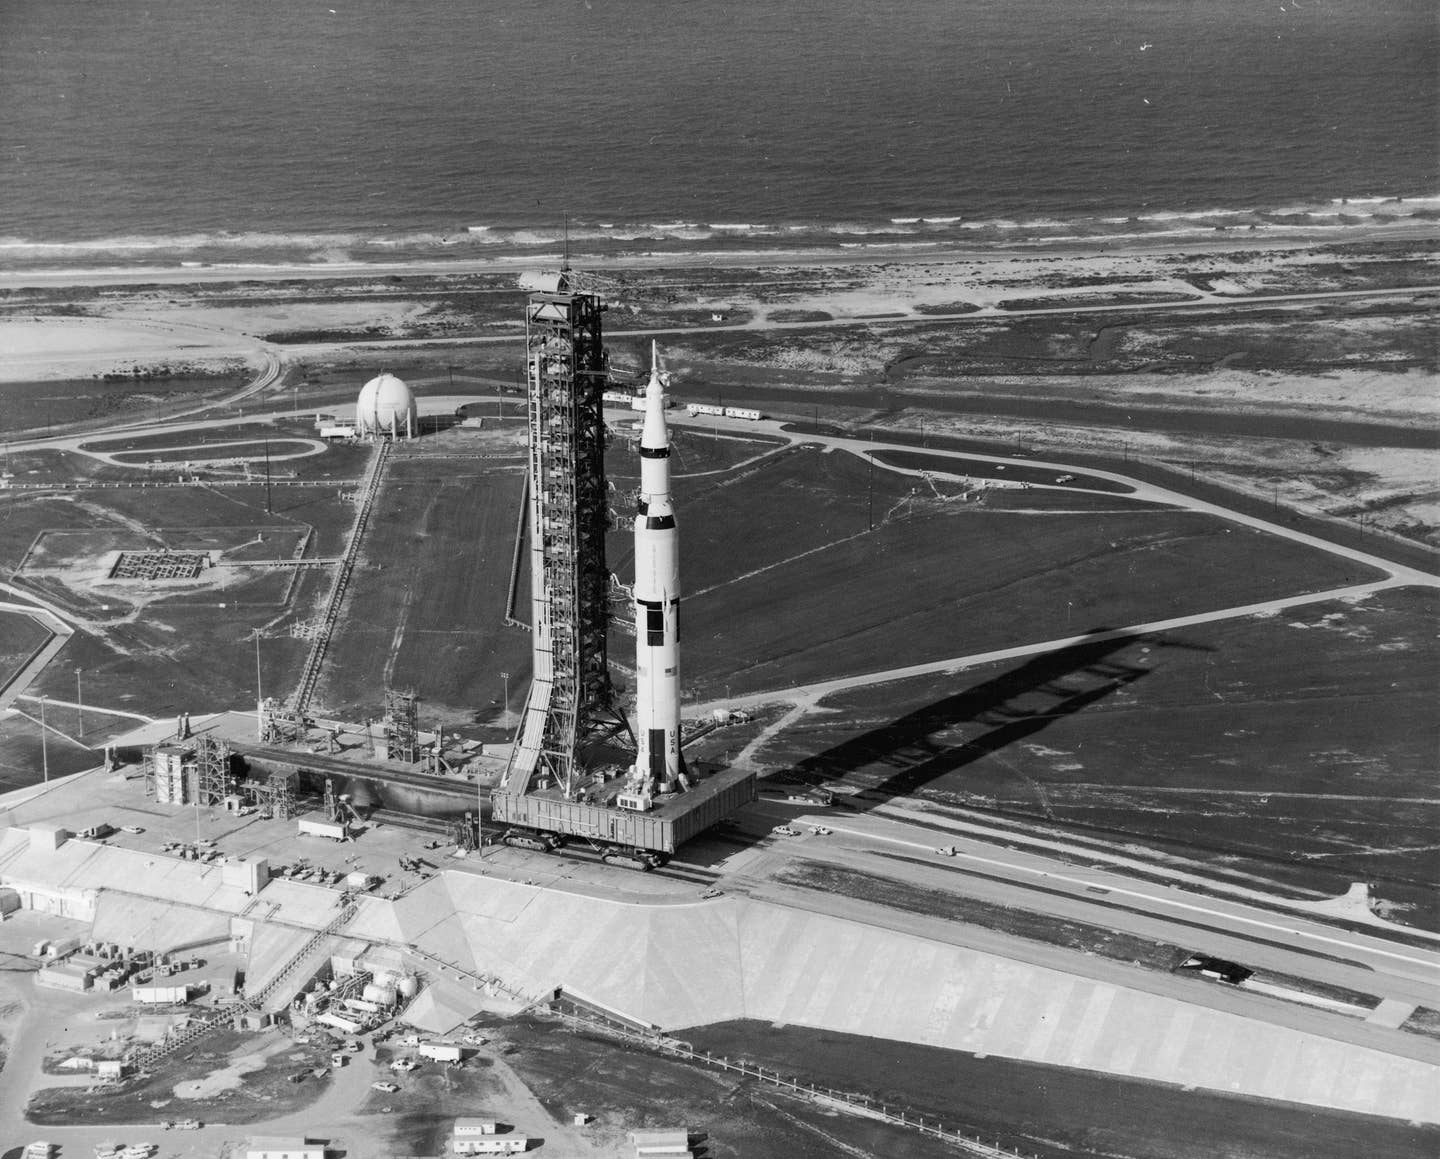 View of the Apollo 11 rocket standing with its gantry on the launch pad at Kennedy Space Center, Cape Canaveral, Florida, July 16, 1969. The rocket served in the first American manned lunar mission, with Neil Armstrong, Michael Collins, and Edwin Aldrin. <em>Photo by Hulton Archive/Getty Images.</em>